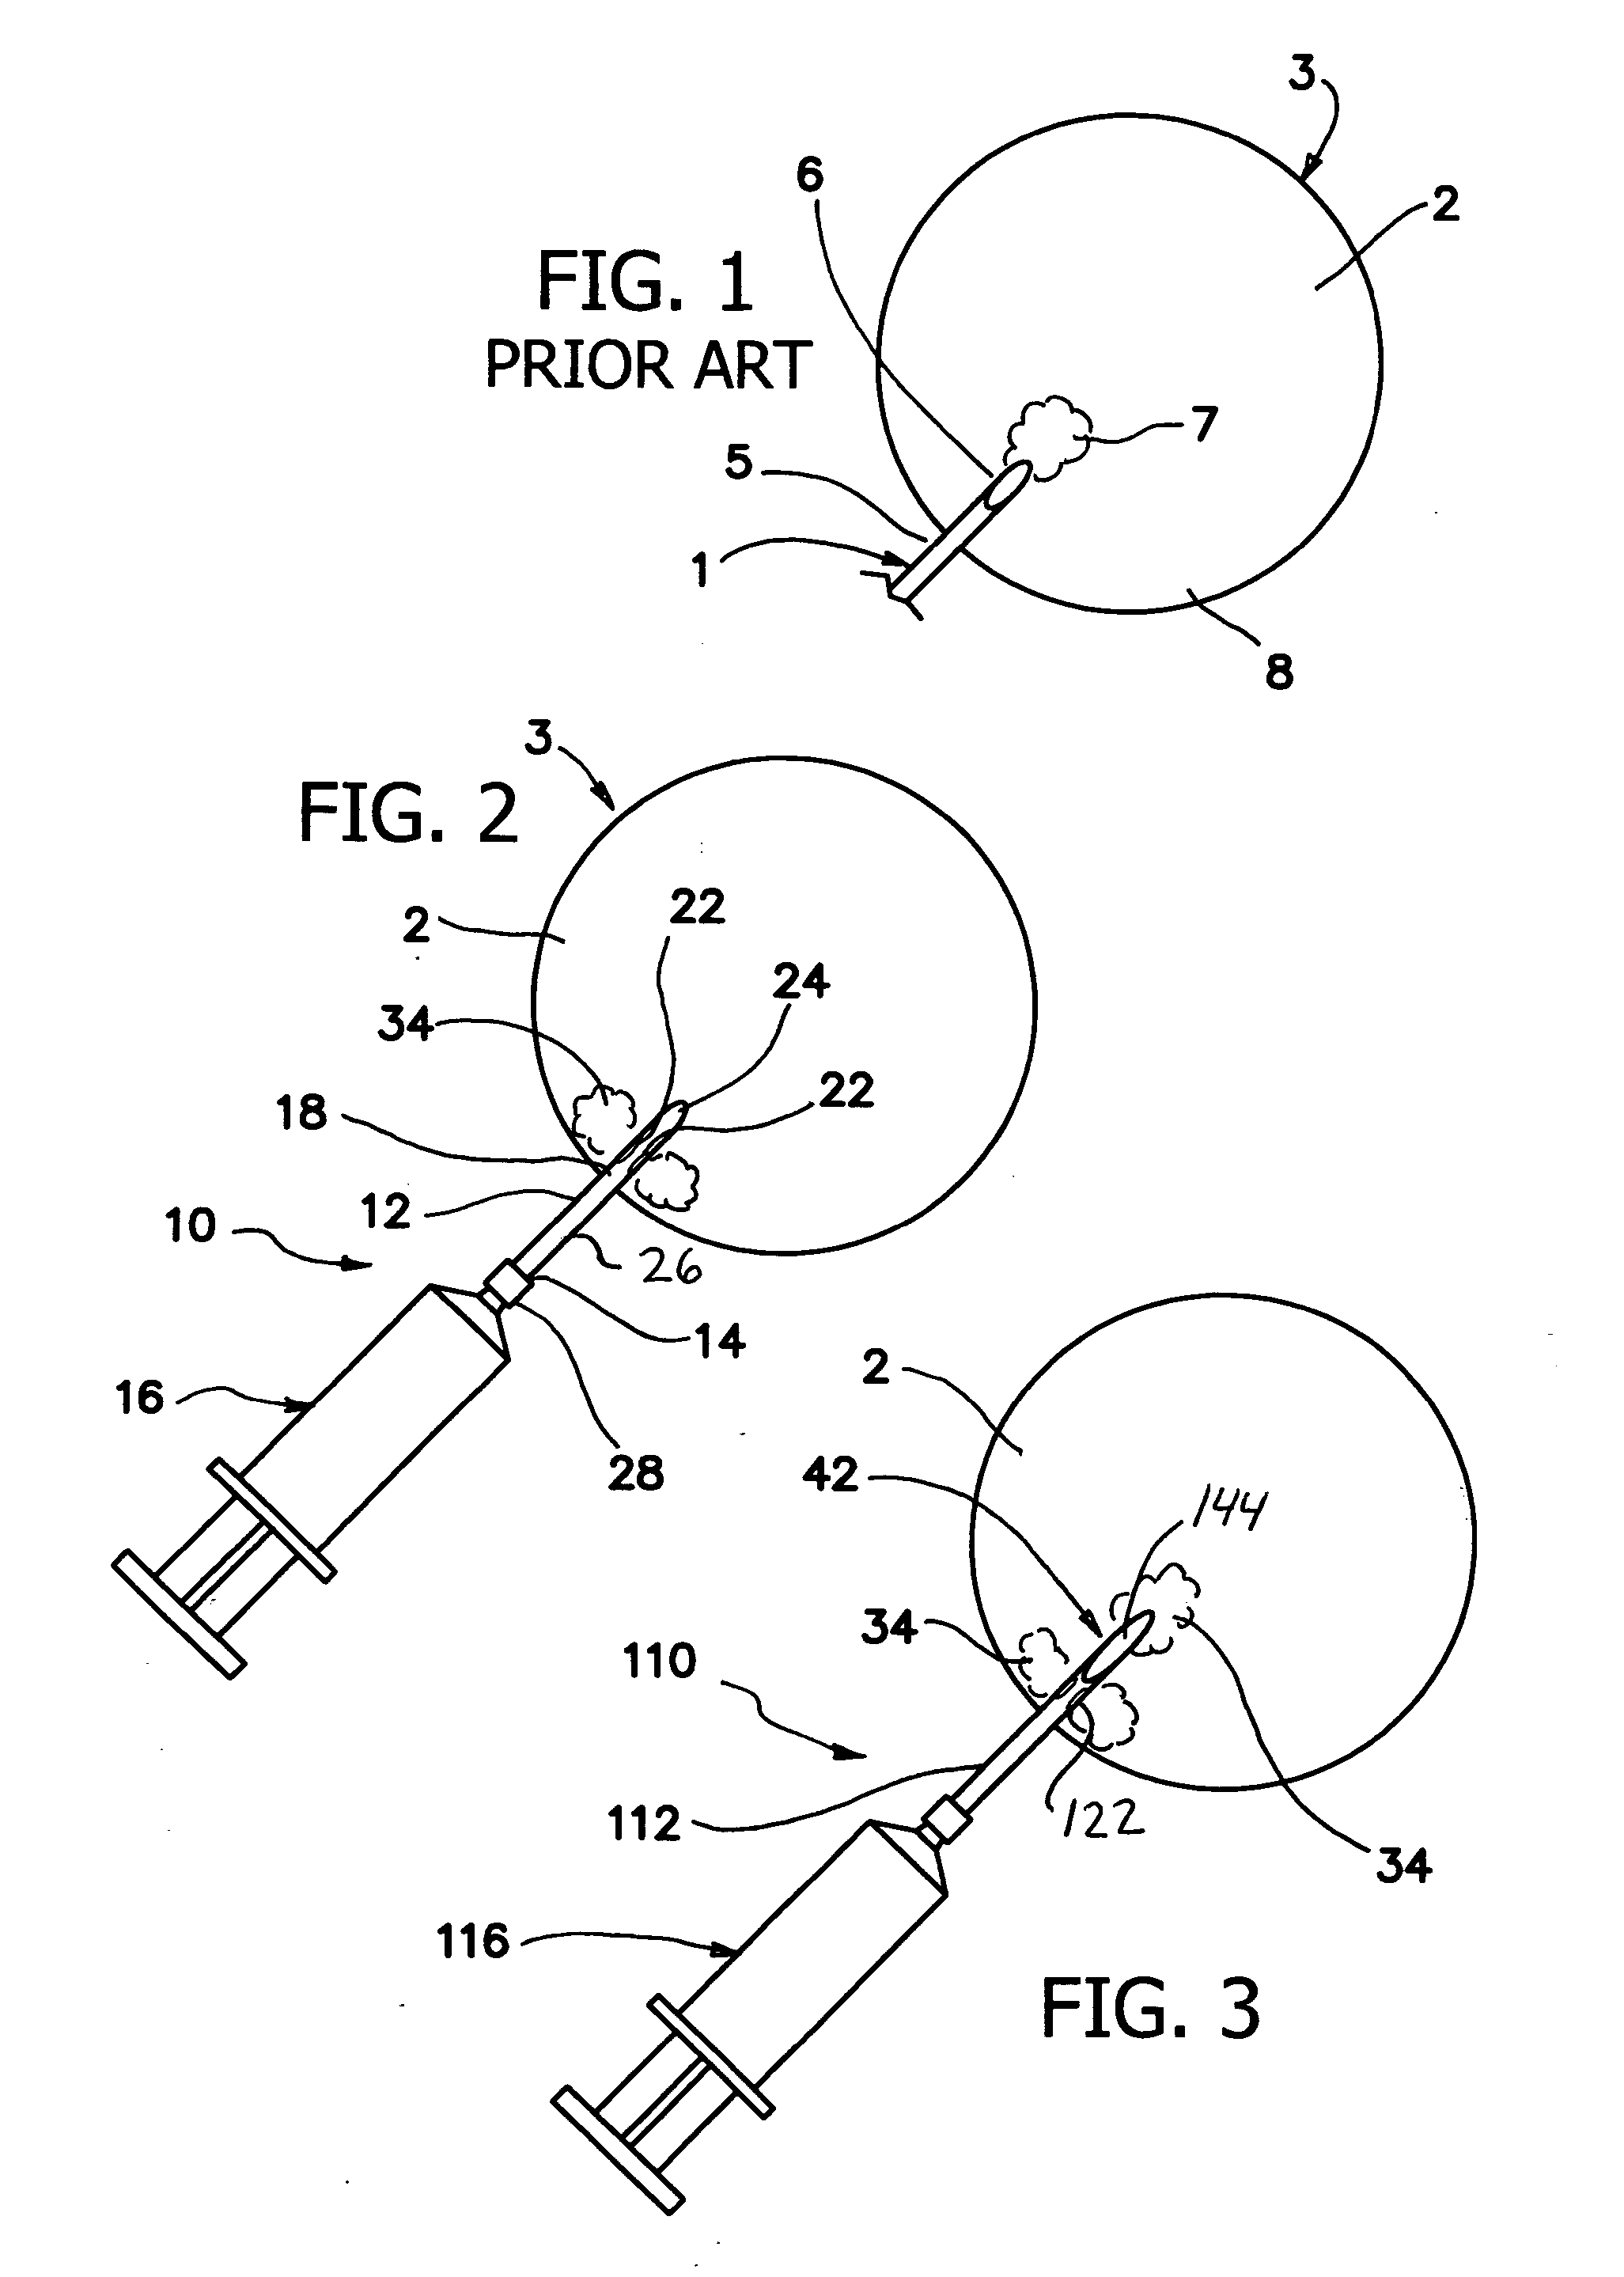 Apparatus and methods useful for intravitreal injection of drugs